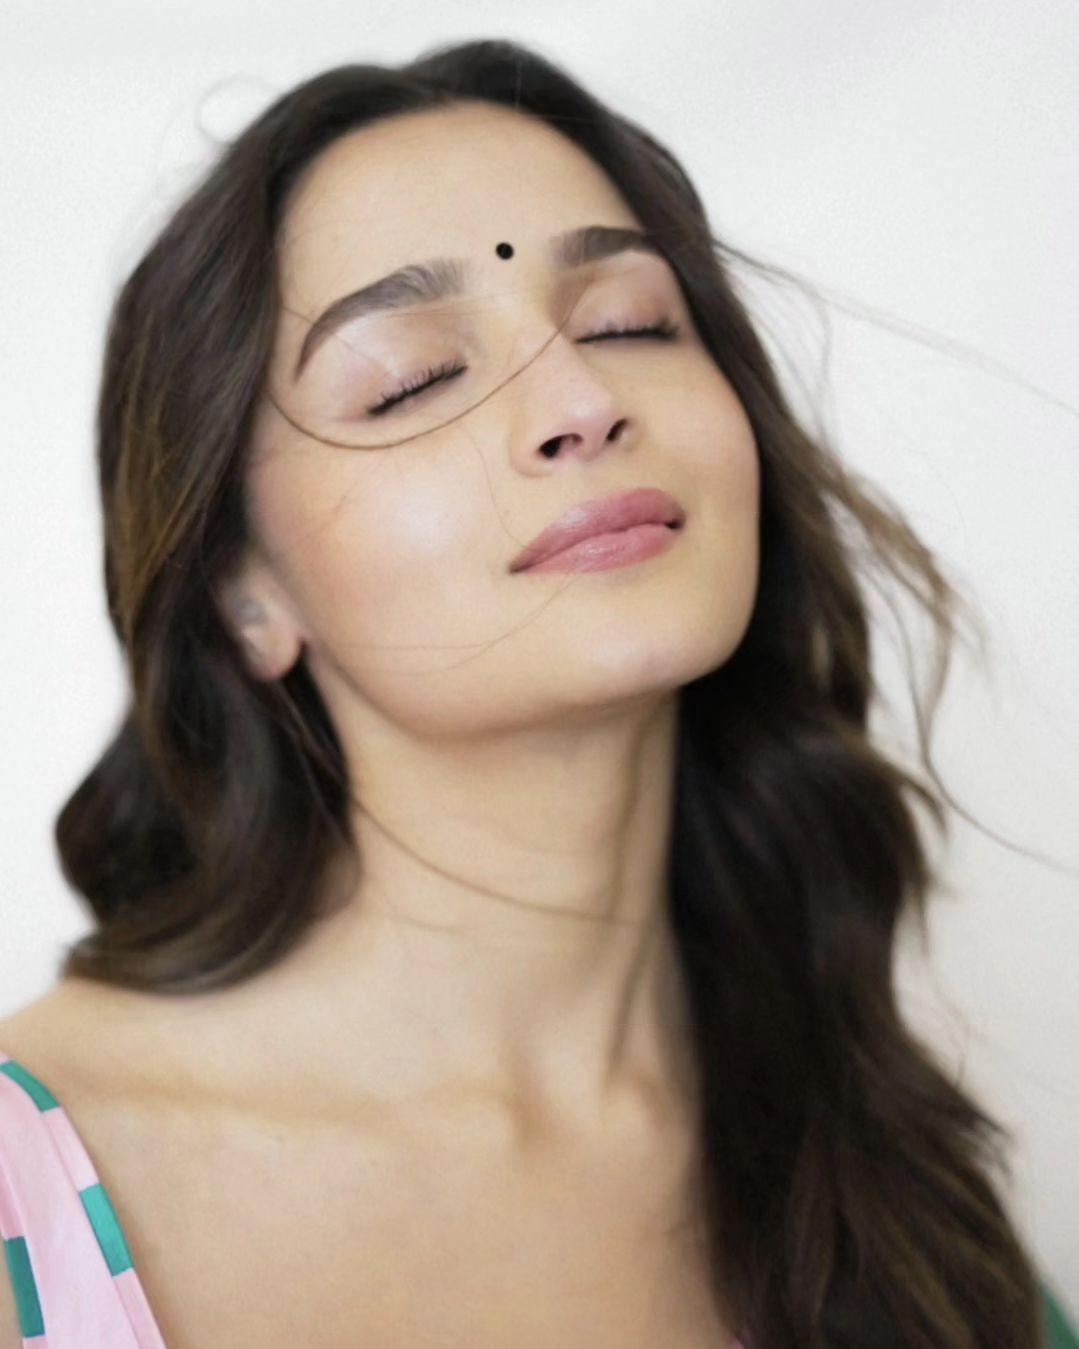 Alia Bhatt's subtle makeup and delicate bindi add a touch of elegance to her mesmerizing look